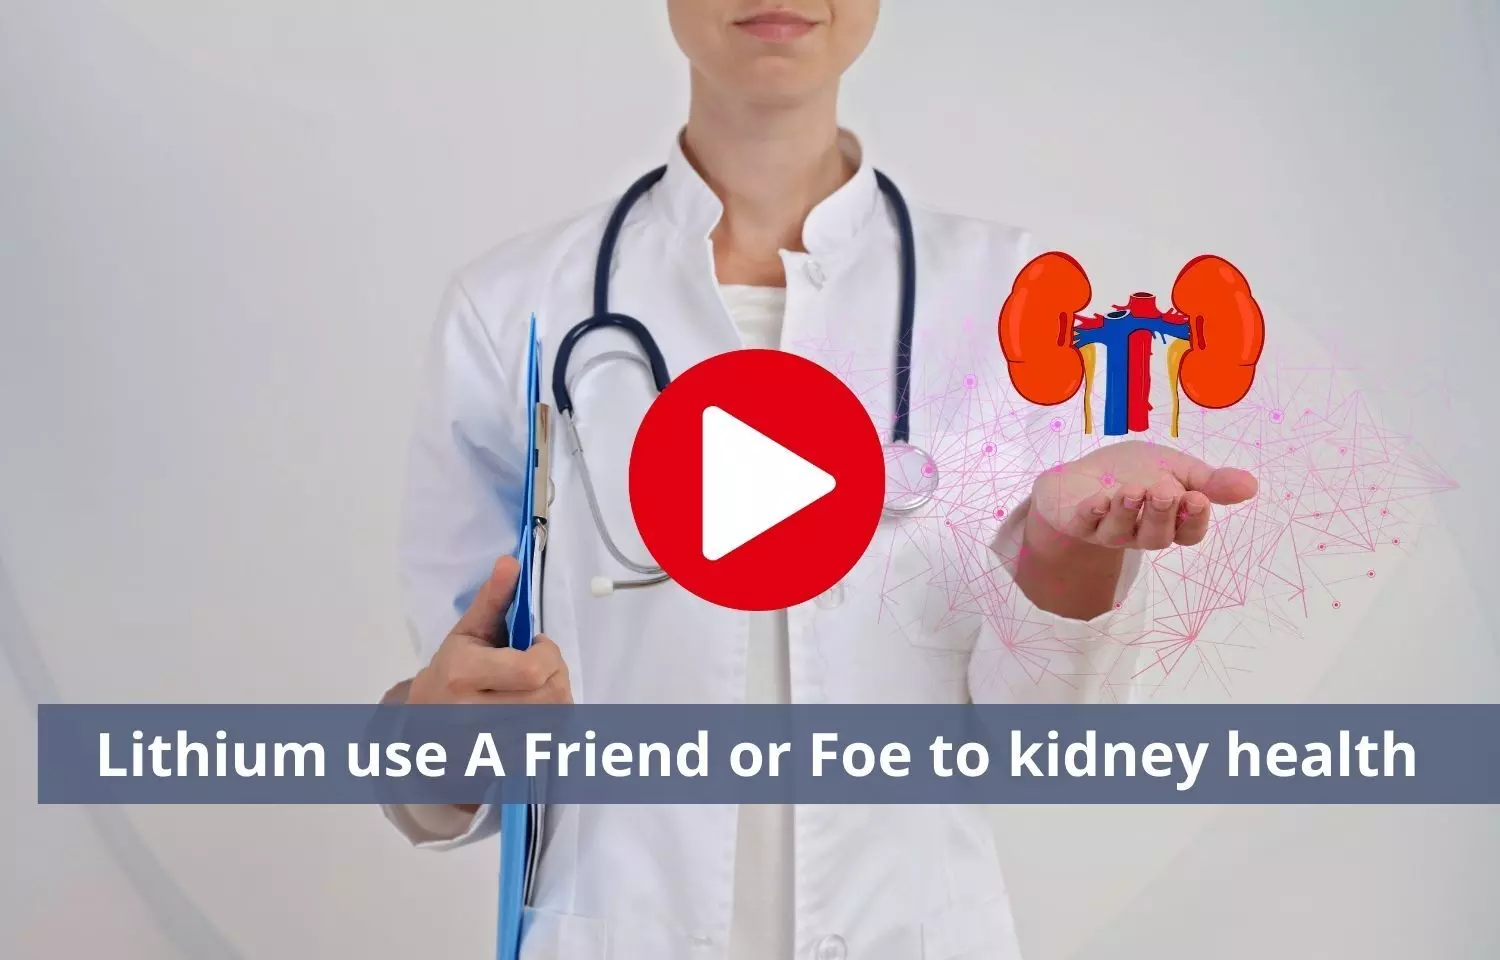 Use of Lithium - Either a Friend or Foe to kidney health